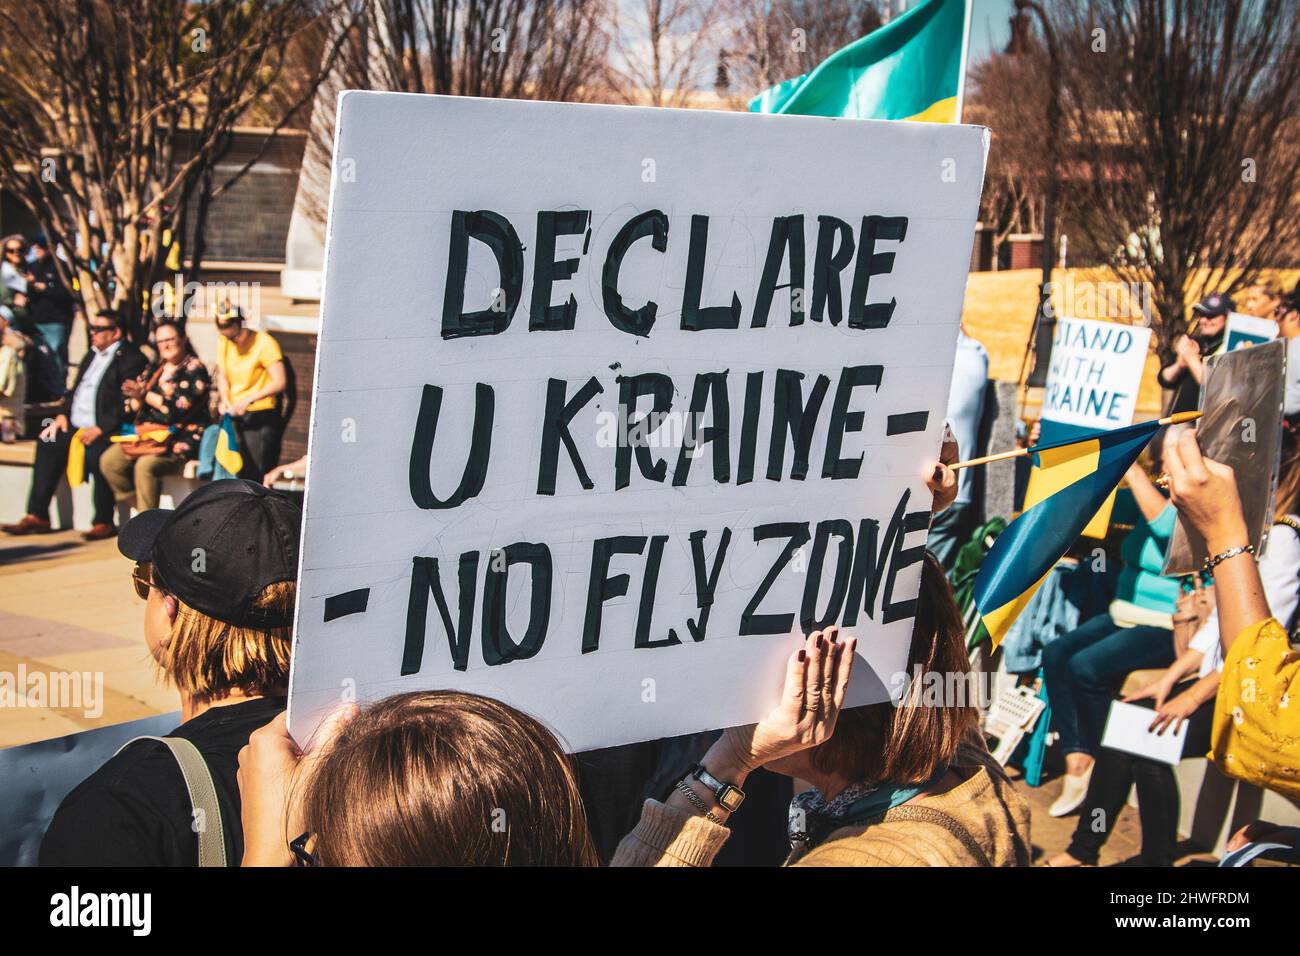 2022 03 05 Tulsa OK USA - Rally for Ukraine with crowd of people and sign saying Declare Ukraine No Fly Zone Stock Photo